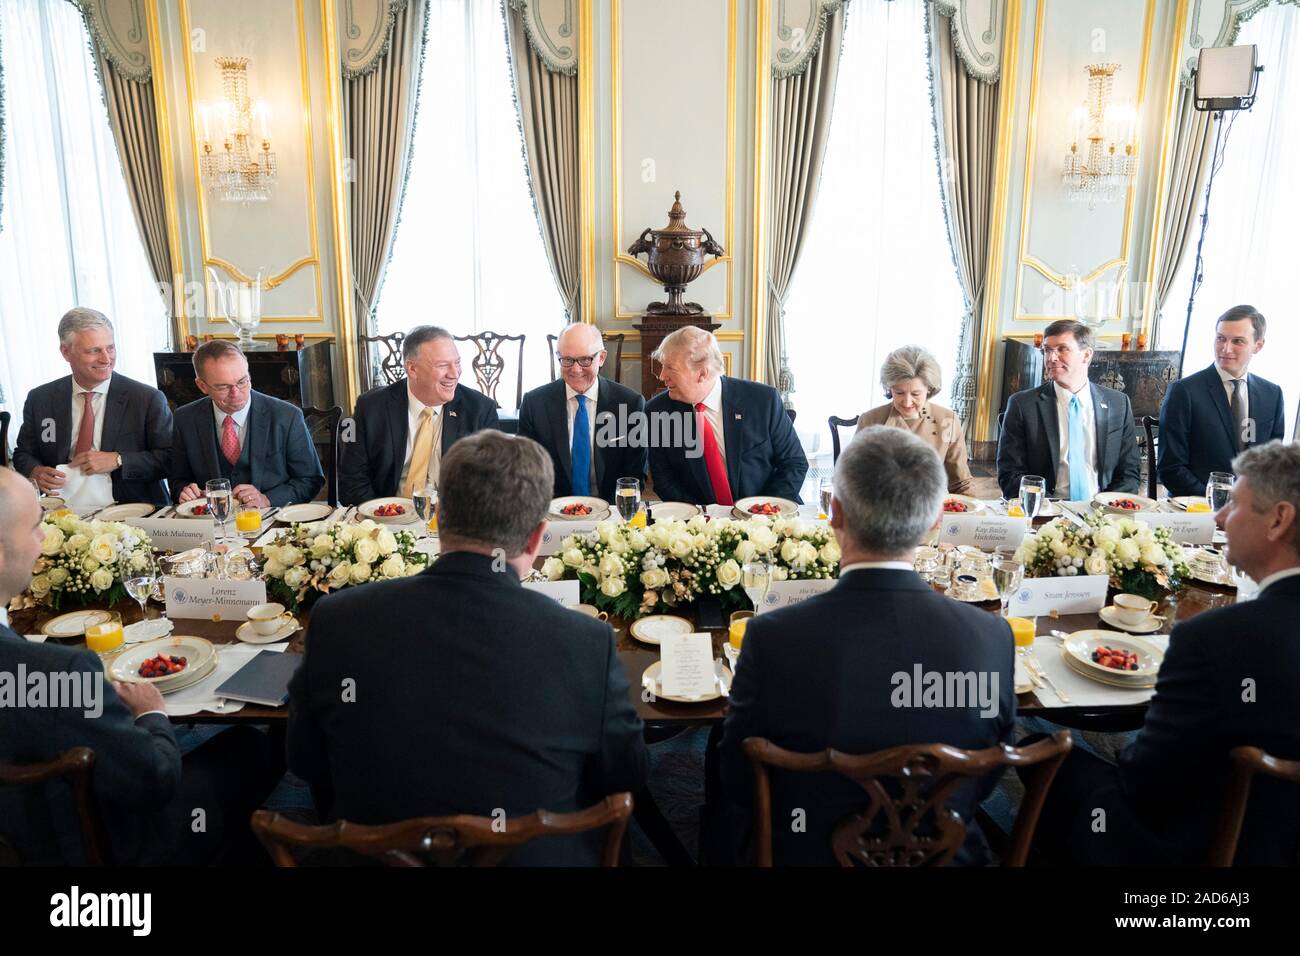 London, UK. 03 December, 2019. U.S. President Donald Trump during a breakfast meeting with NATO Secretary General Jens Stoltenberg before the start of the NATO Summit at Winfield House December 3, 2019 in London, UK. Joining the President is Chief of Staff Mick Mulvaney, 2nd left, Secretary of State Mike Pompeo, 3rd left, Ambassador to Great Britain Woody Johnson, center left, Ambassador to NATO Kay Bailey Hutchison, center right, Secretary of Defense Mark Esper and Presidential son-in-law Jared Kushner, right.      Credit: Shealah Craighead/Planetpix/Alamy Live News Stock Photo